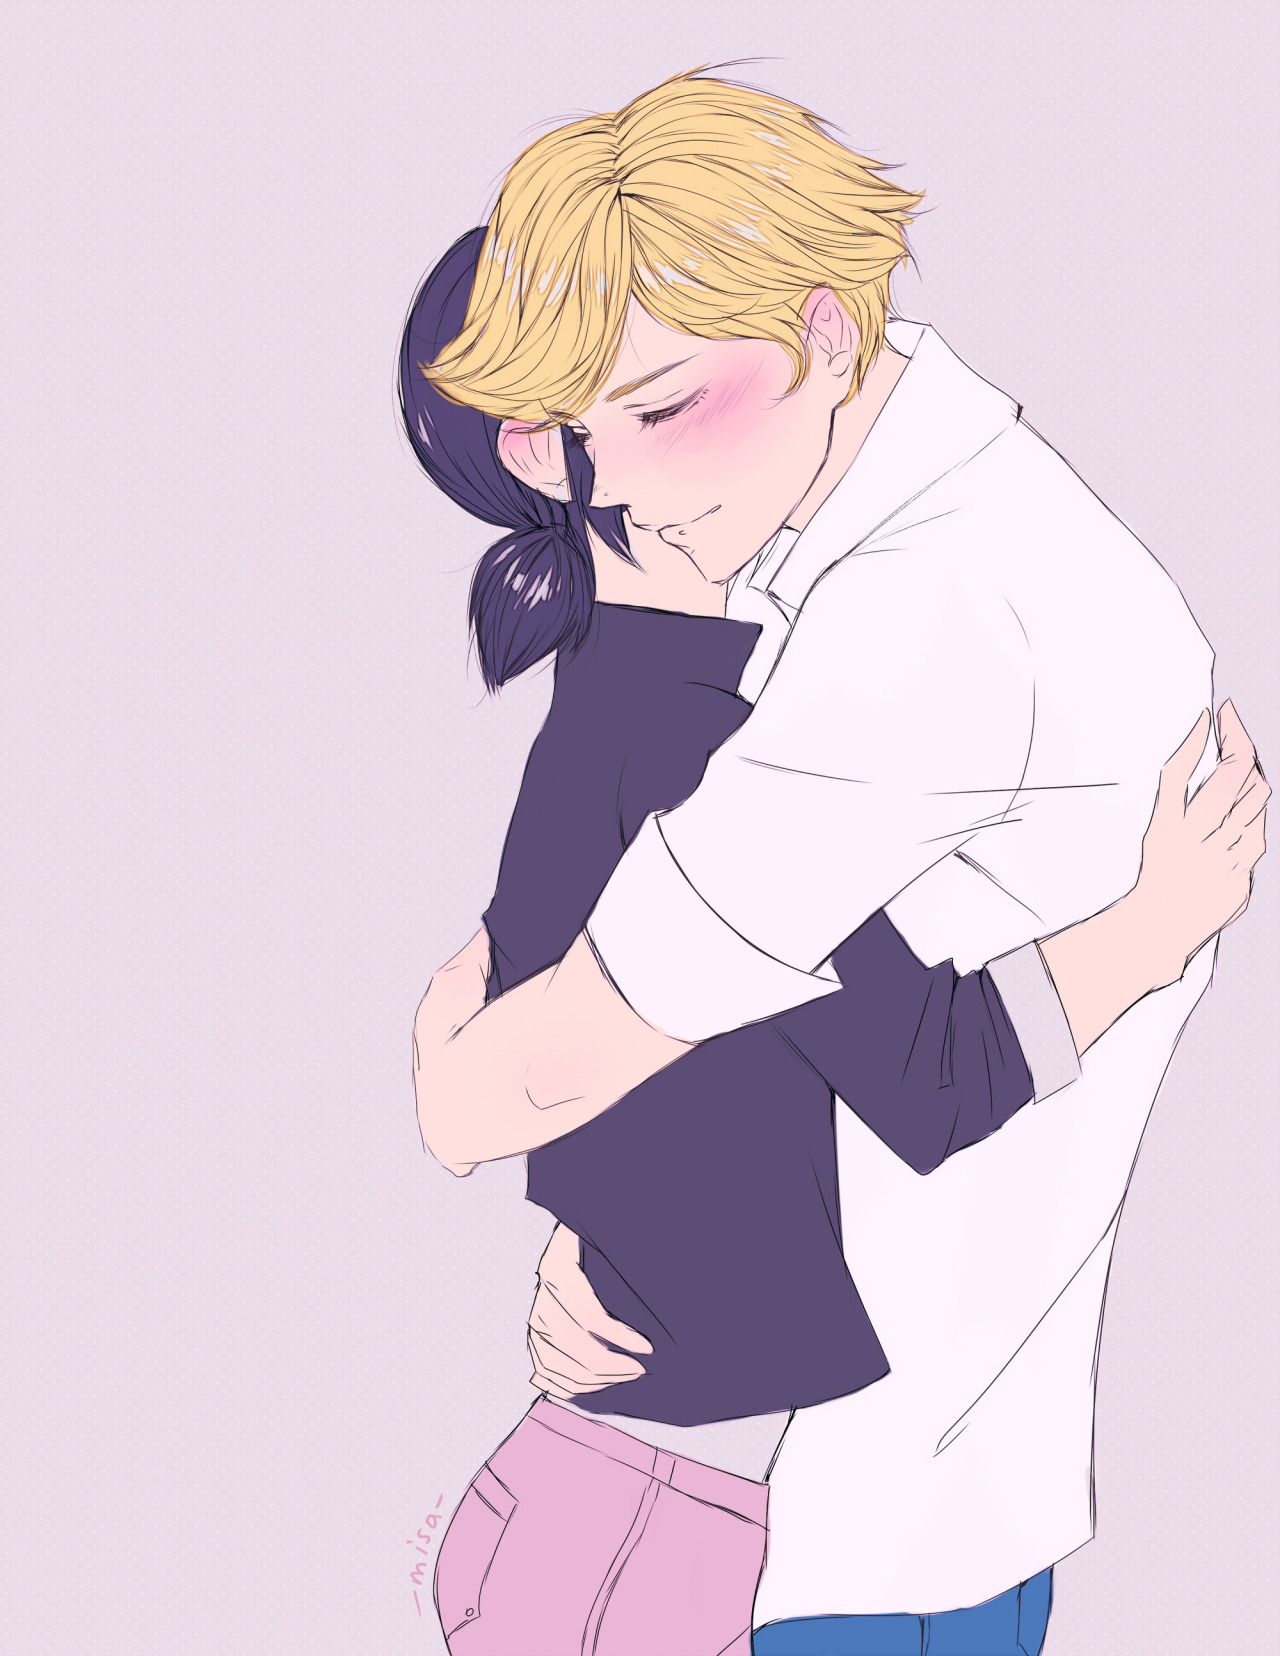 Adrien and Marinette.